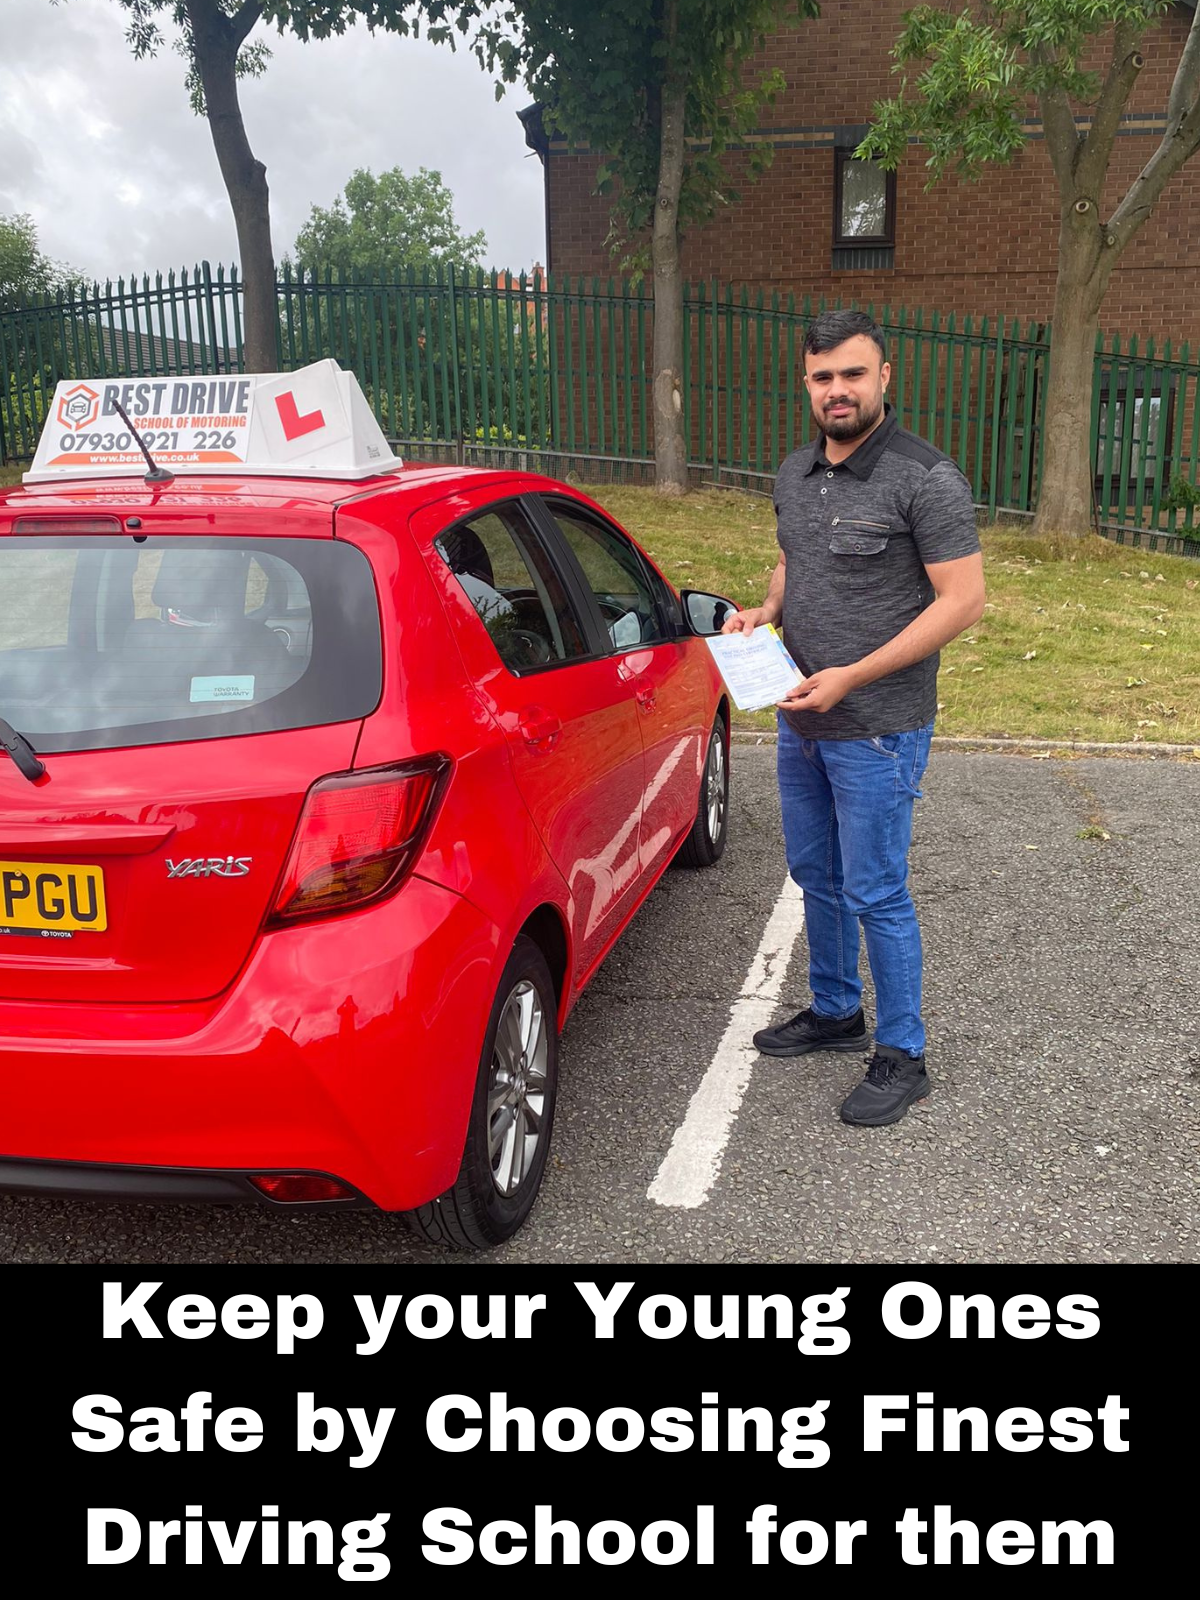 Keep your Young Ones Safe by Choosing Finest Driving School for them